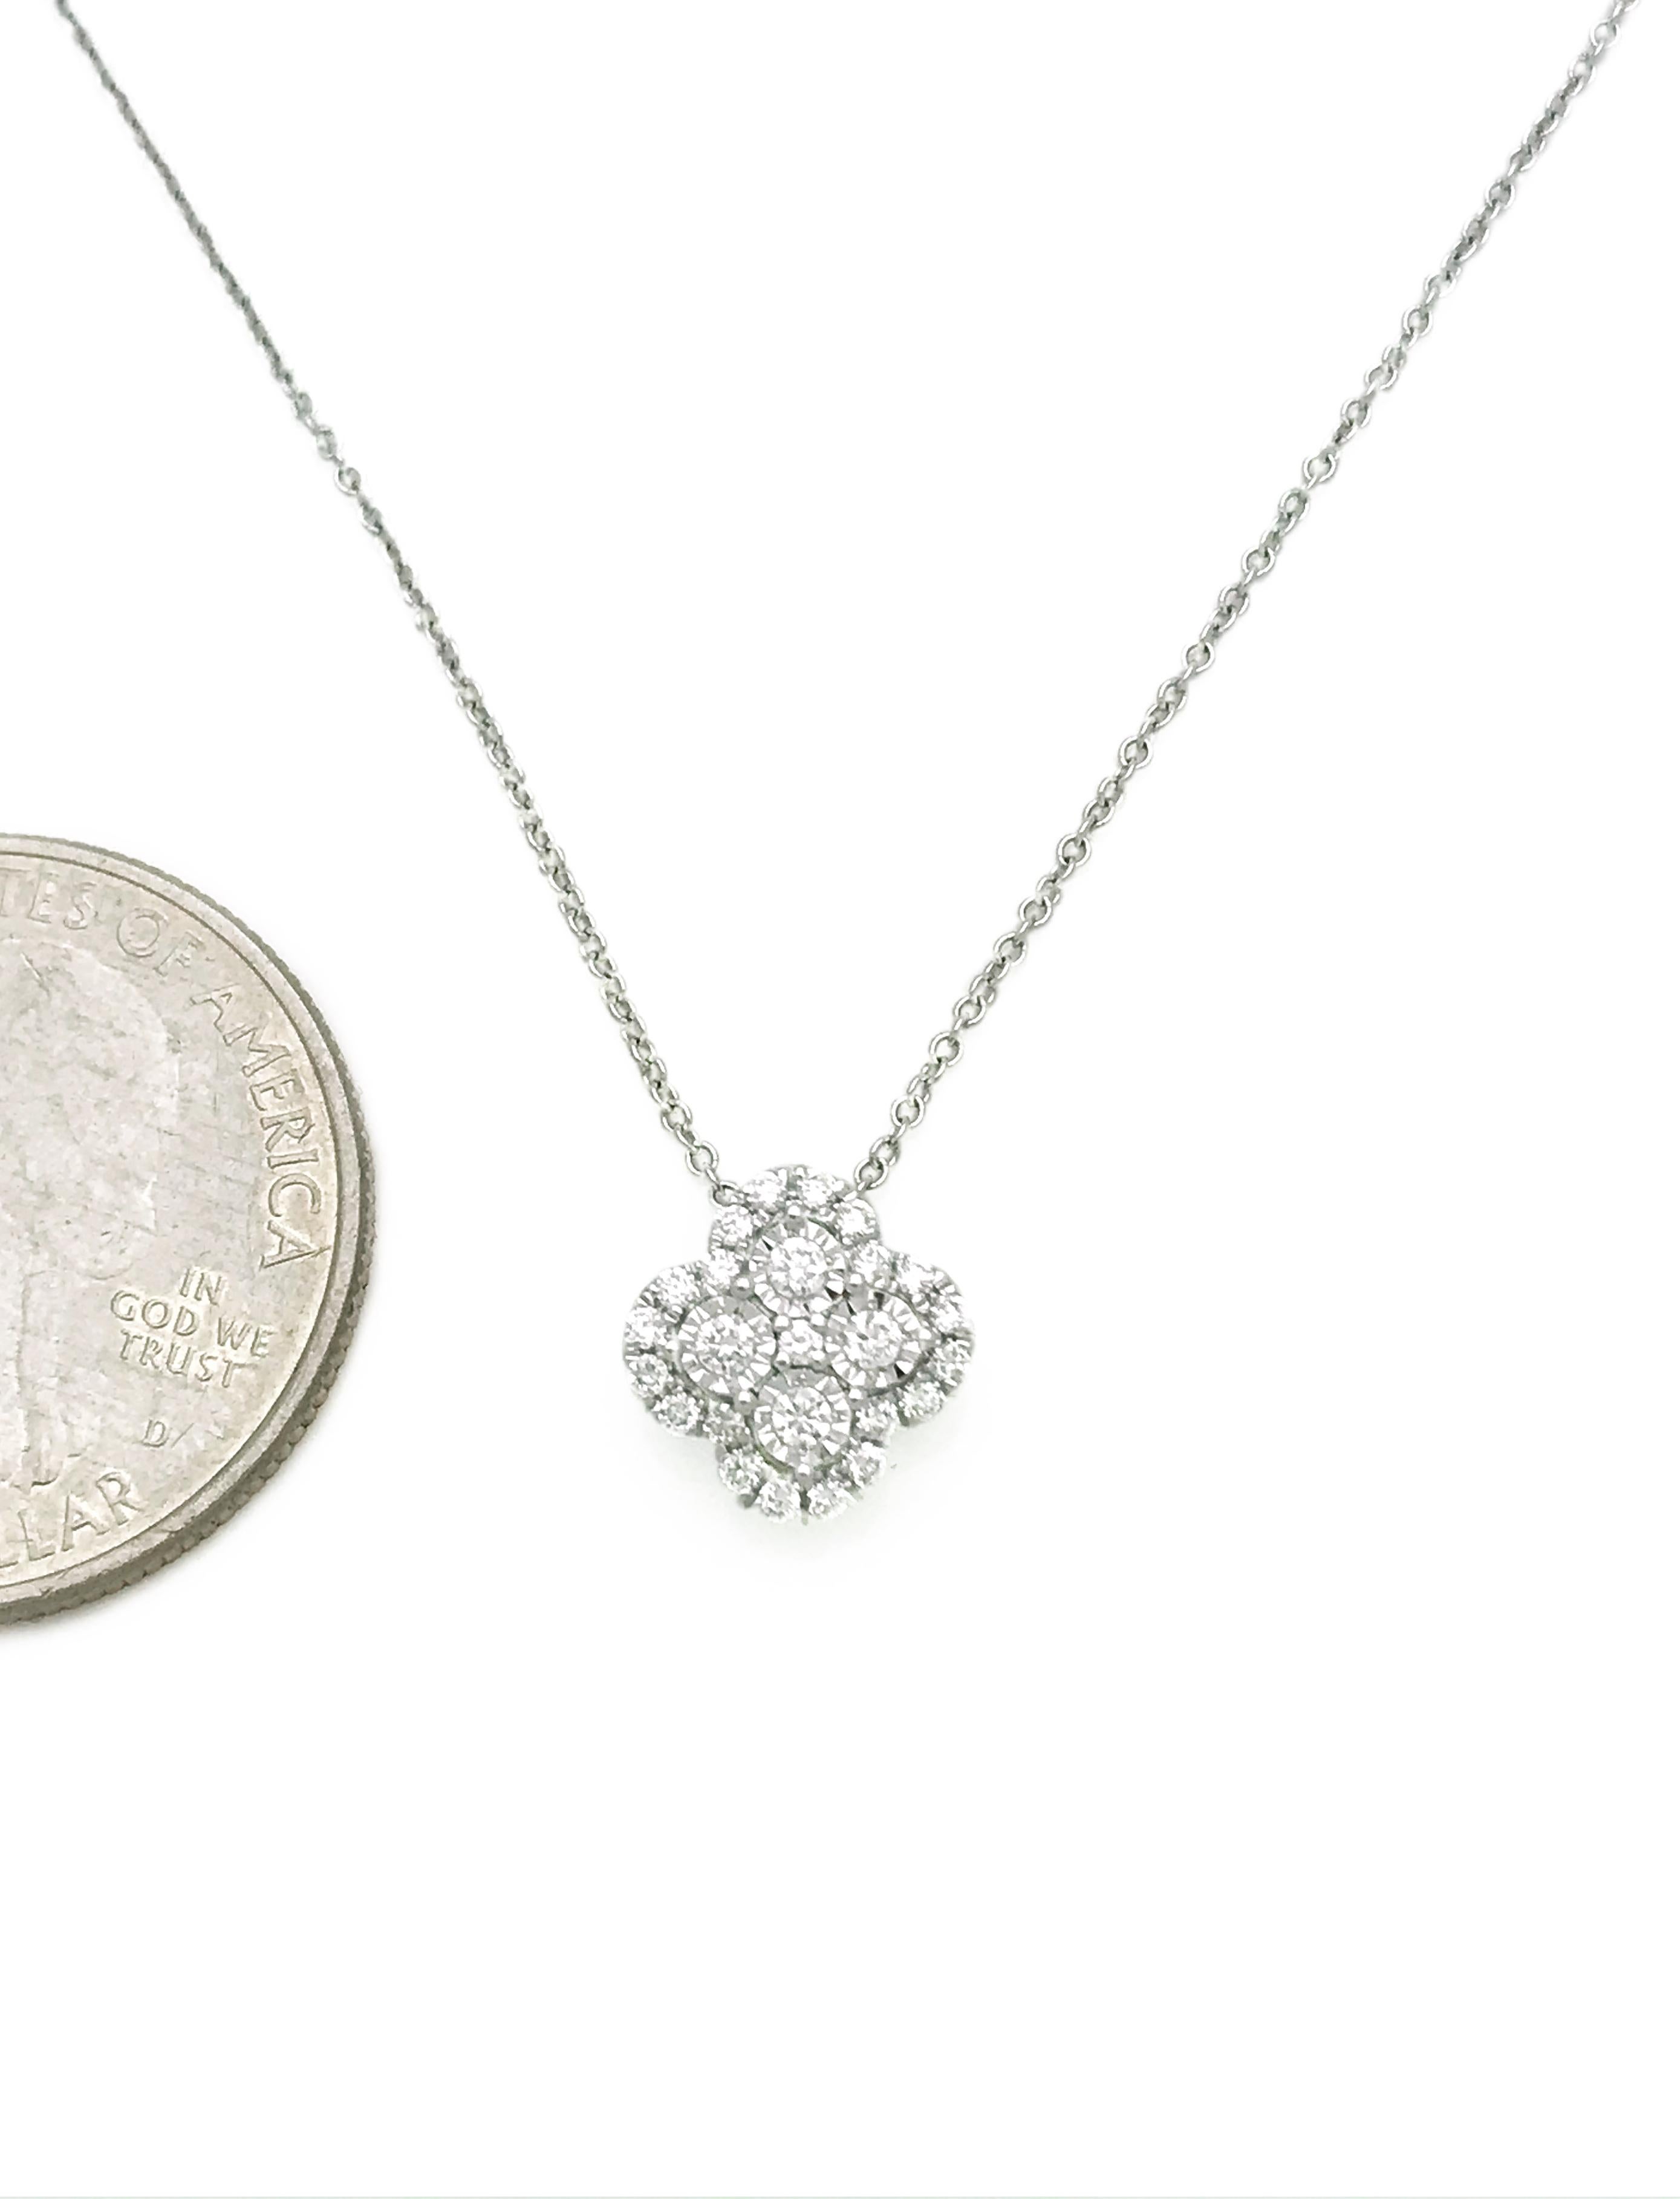 This beautiful diamond halo necklace is made of 25 round brilliant cut diamonds.

The necklace is made of entirely 14kt white gold. A high quality cable style chain supports the dainty pendant. This necklace is the perfect gift for a special